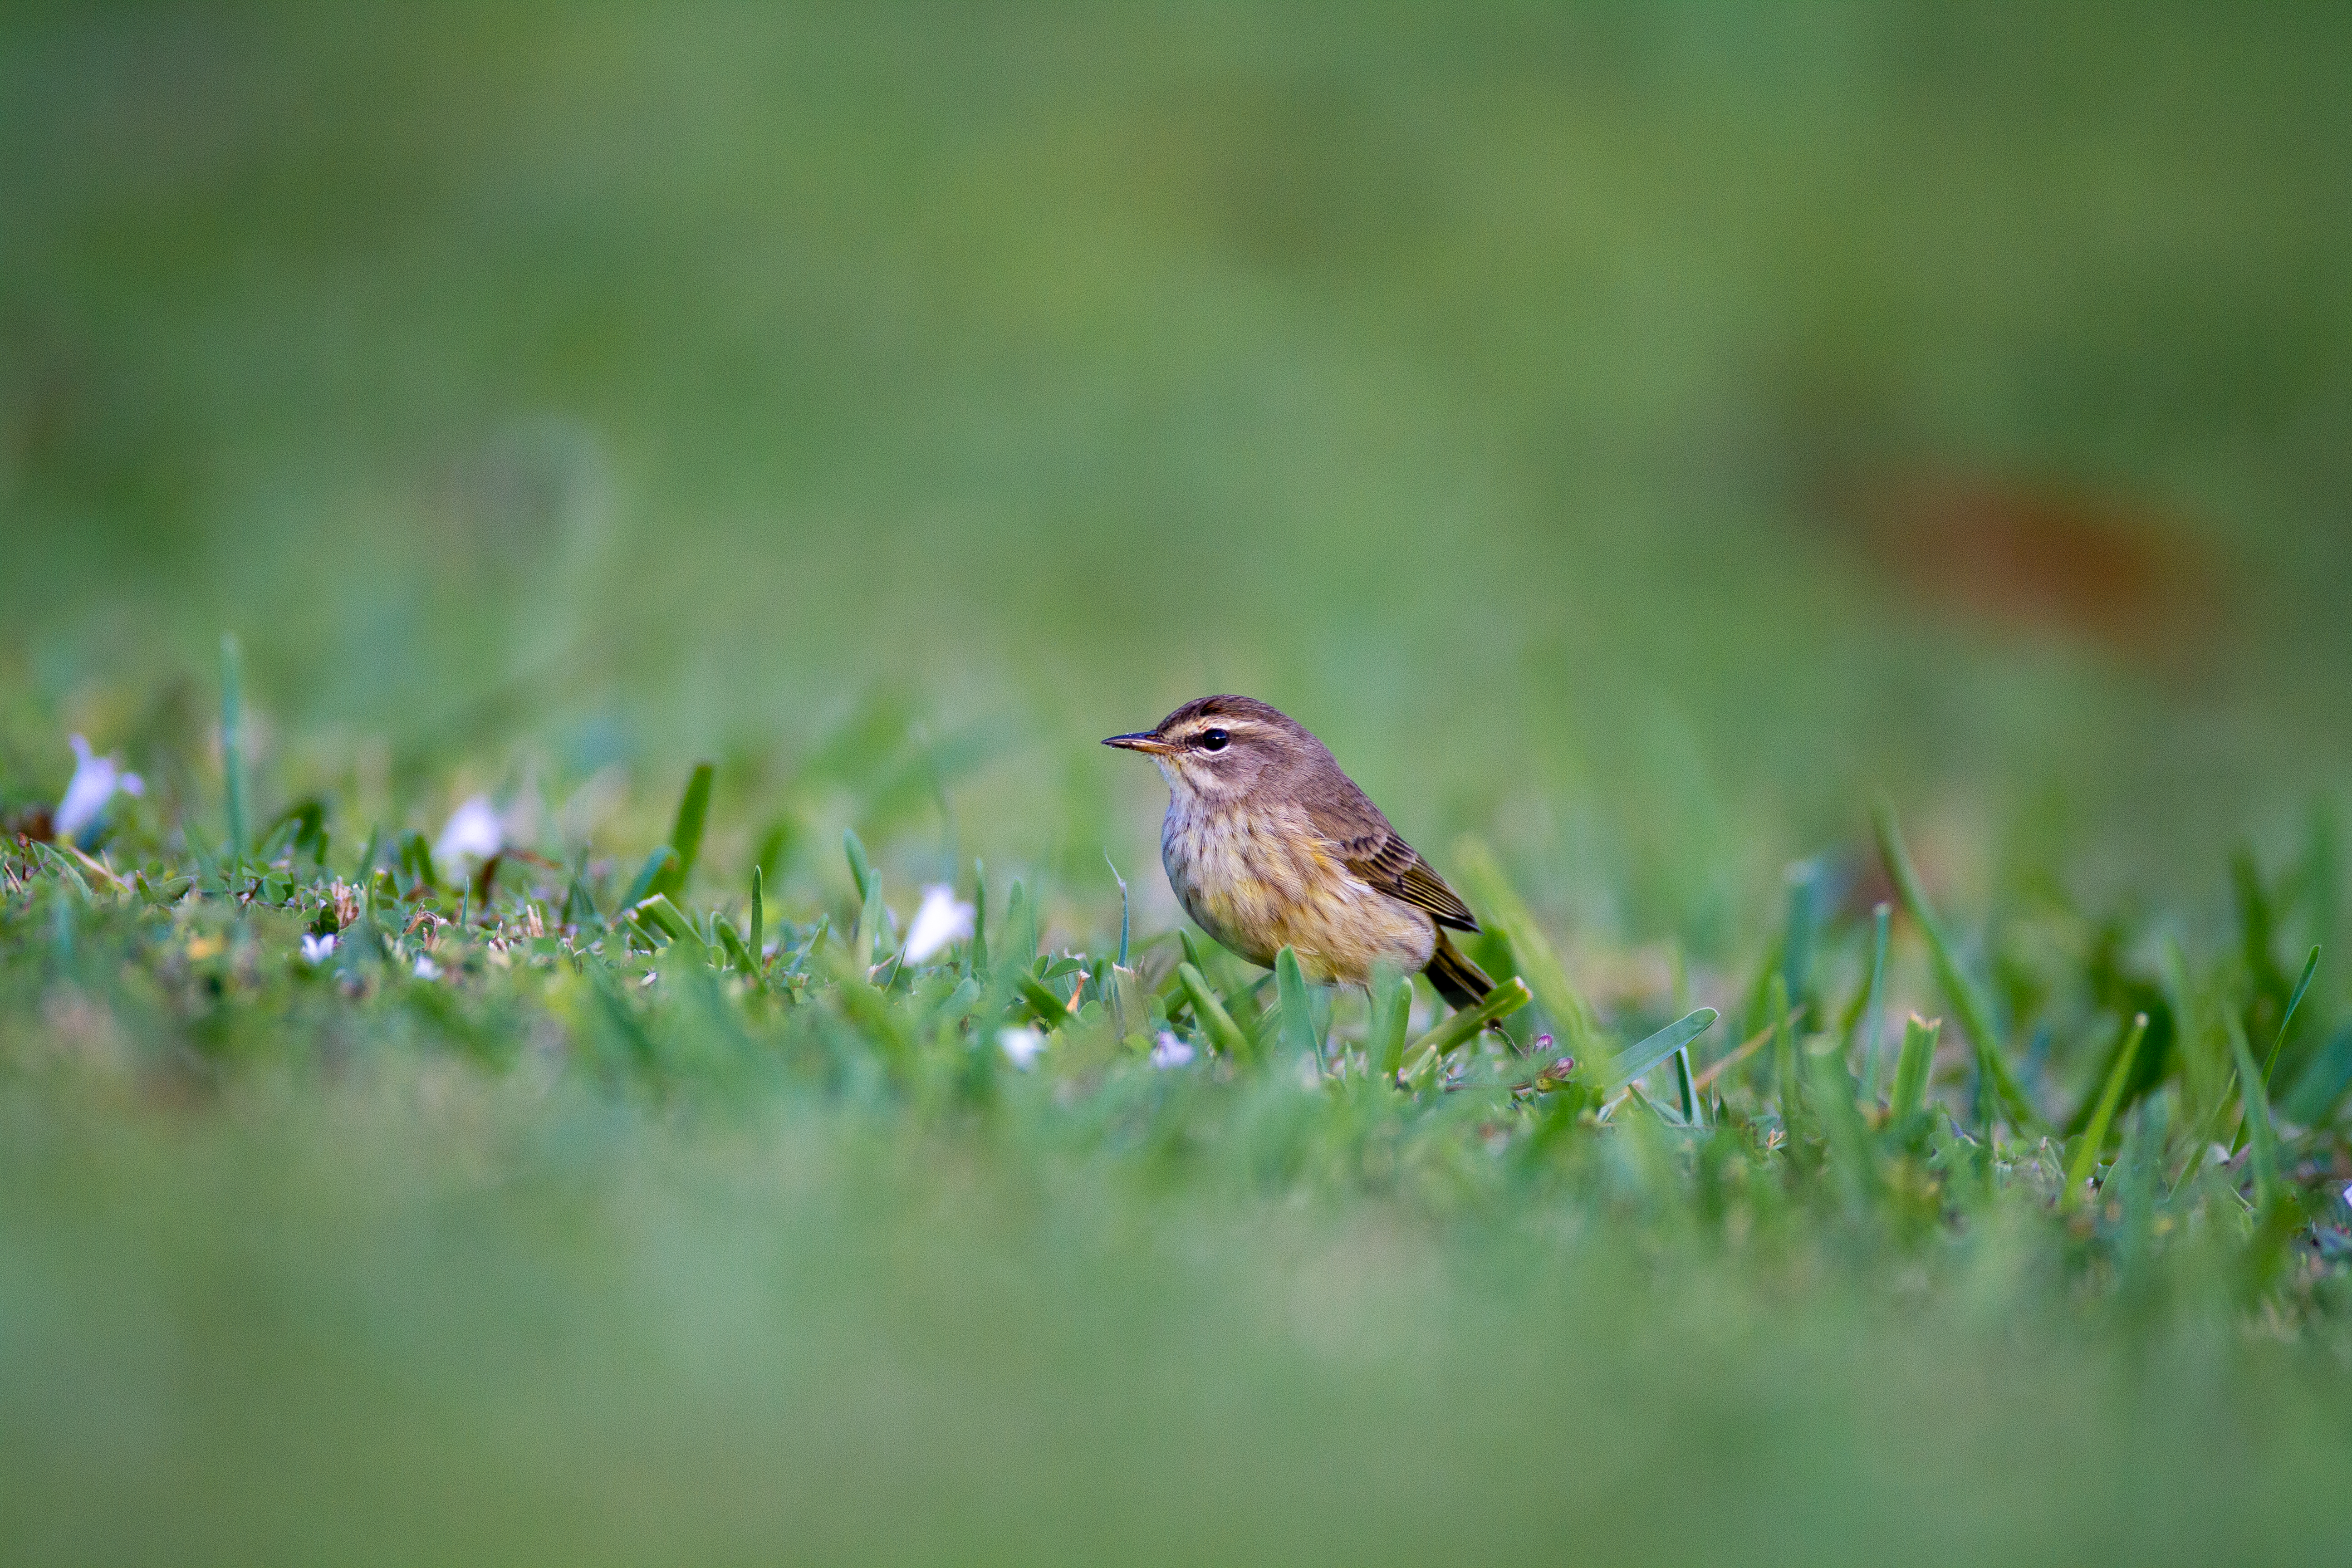 A palm warbler sits on the grass.